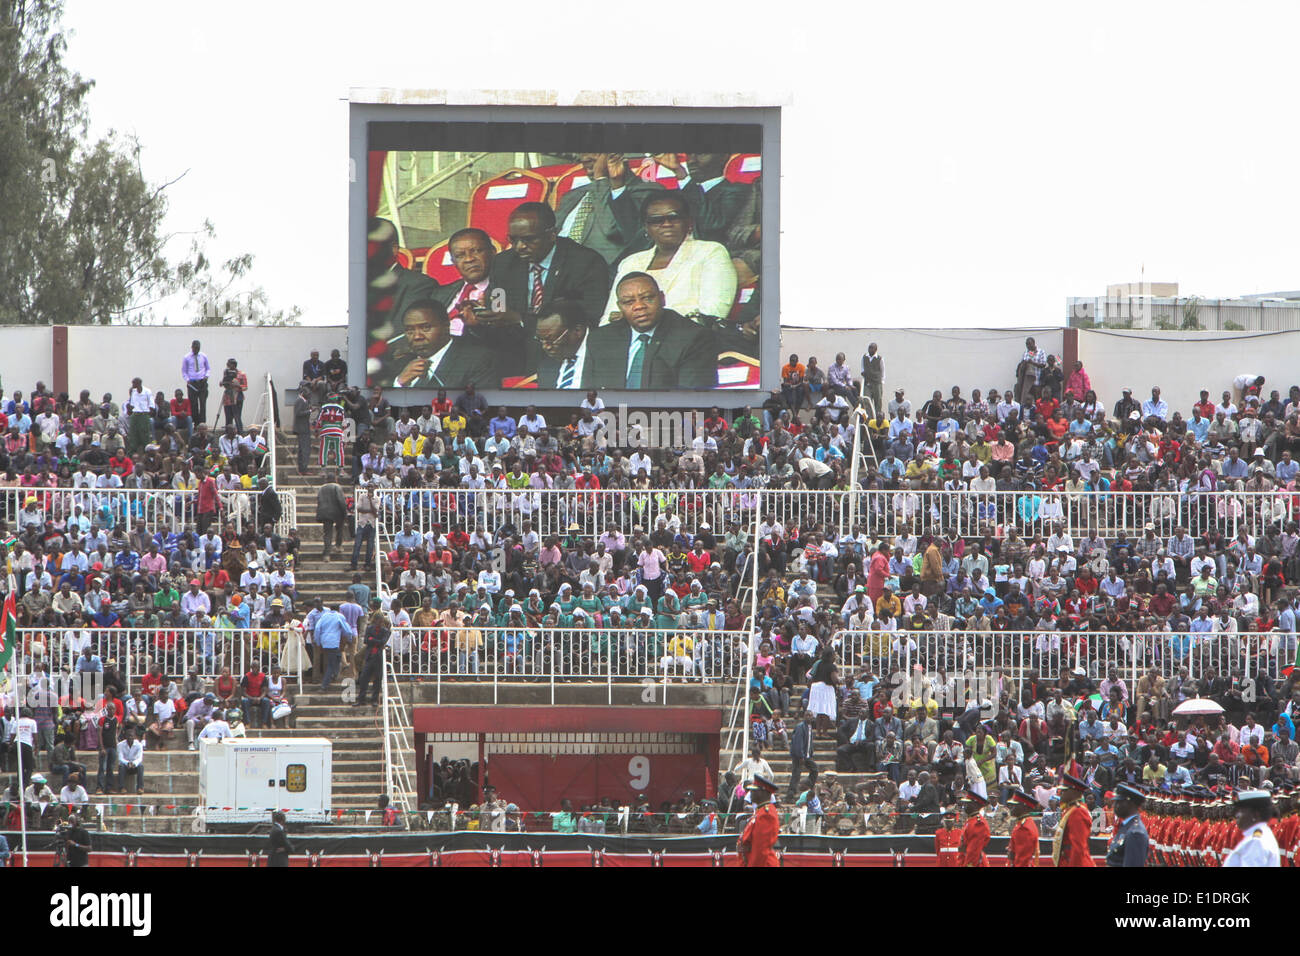 Nairobi, Kenya. 01st June, 2014. Kenyans attends the country’s 51 Independence day cerebrations at Nyayo National Stadium in Nairobi Kenyan capital, on June 1, 2014, June 1st is an annual cerebration to mark the freedom of the country from the British colonials in 1963, The cerebrations comes at a time Kenya has economic and insecurity challenges.  Credit:  Tom Maruko/PACIFIC PRESS/Alamy Live News Stock Photo